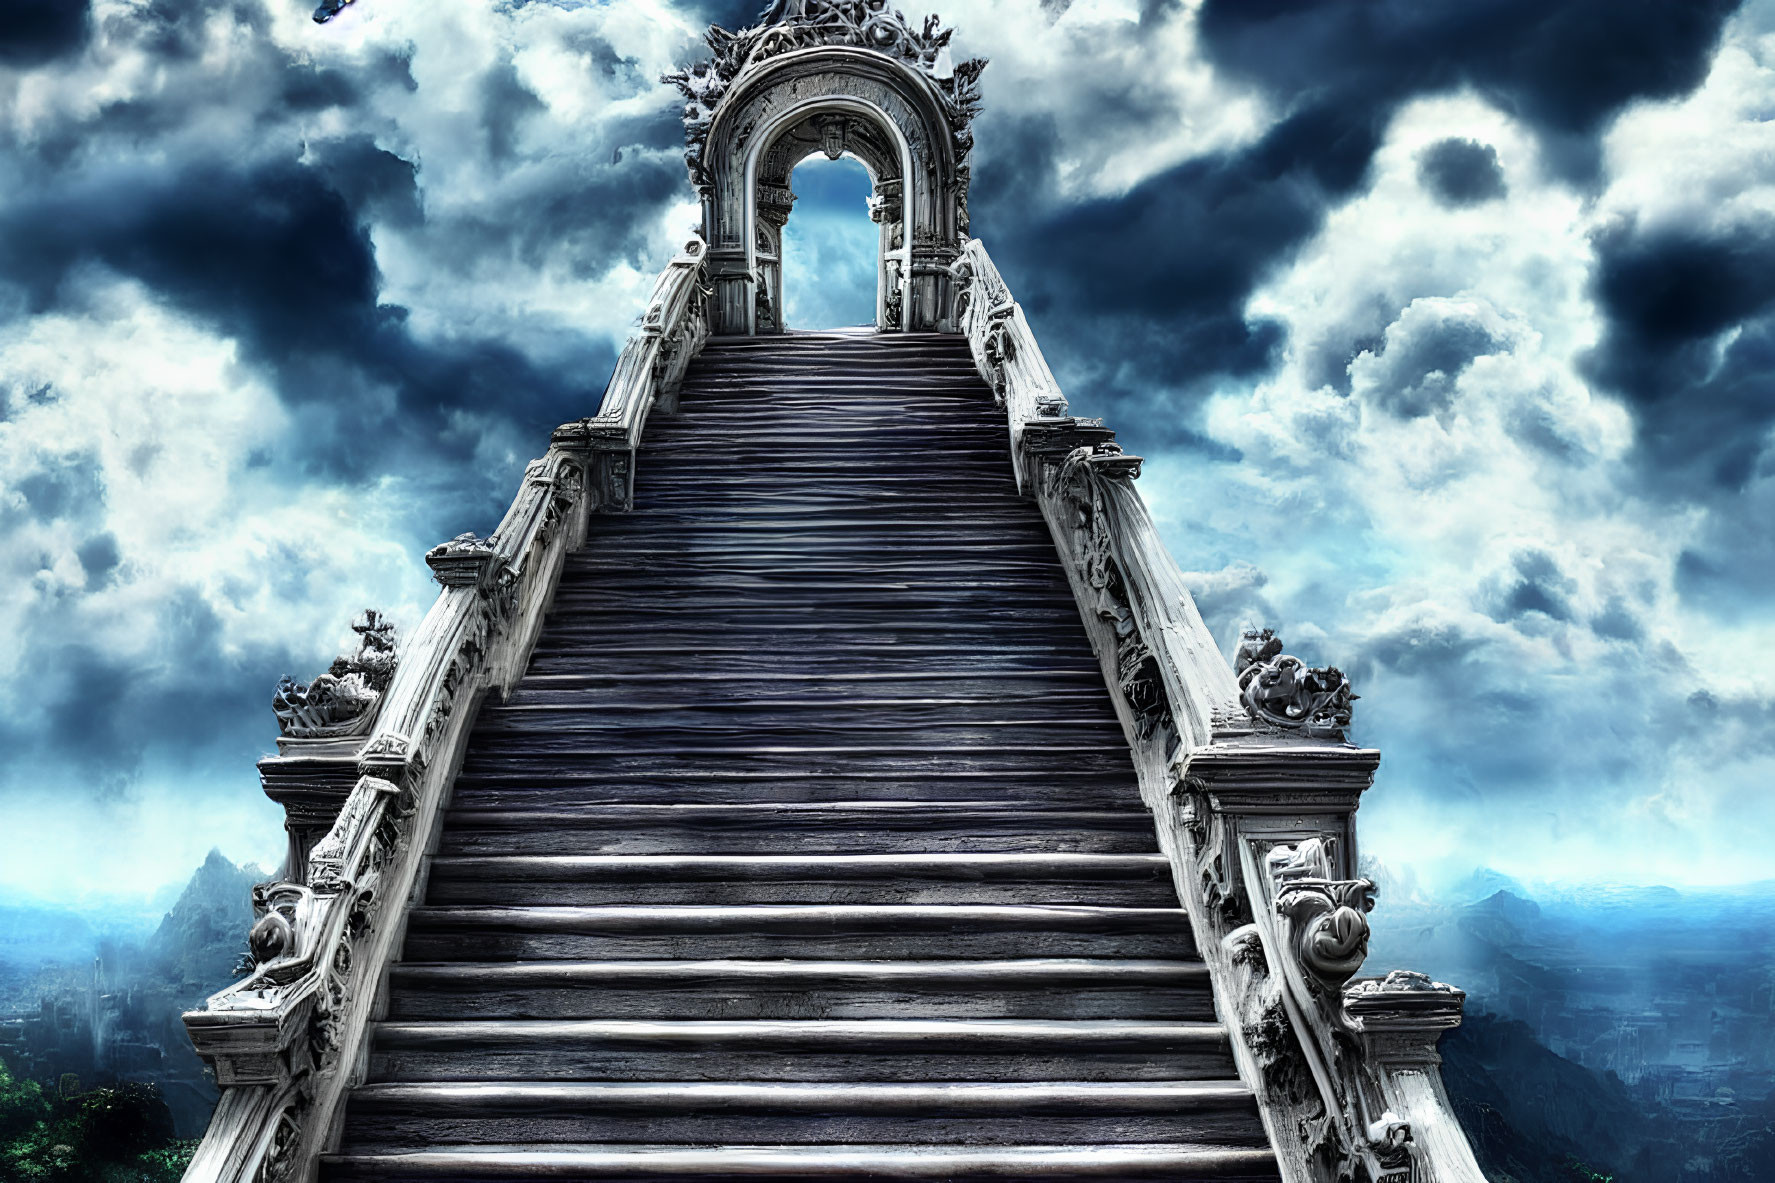 Elaborate Stone Staircase Under Cloudy Sky